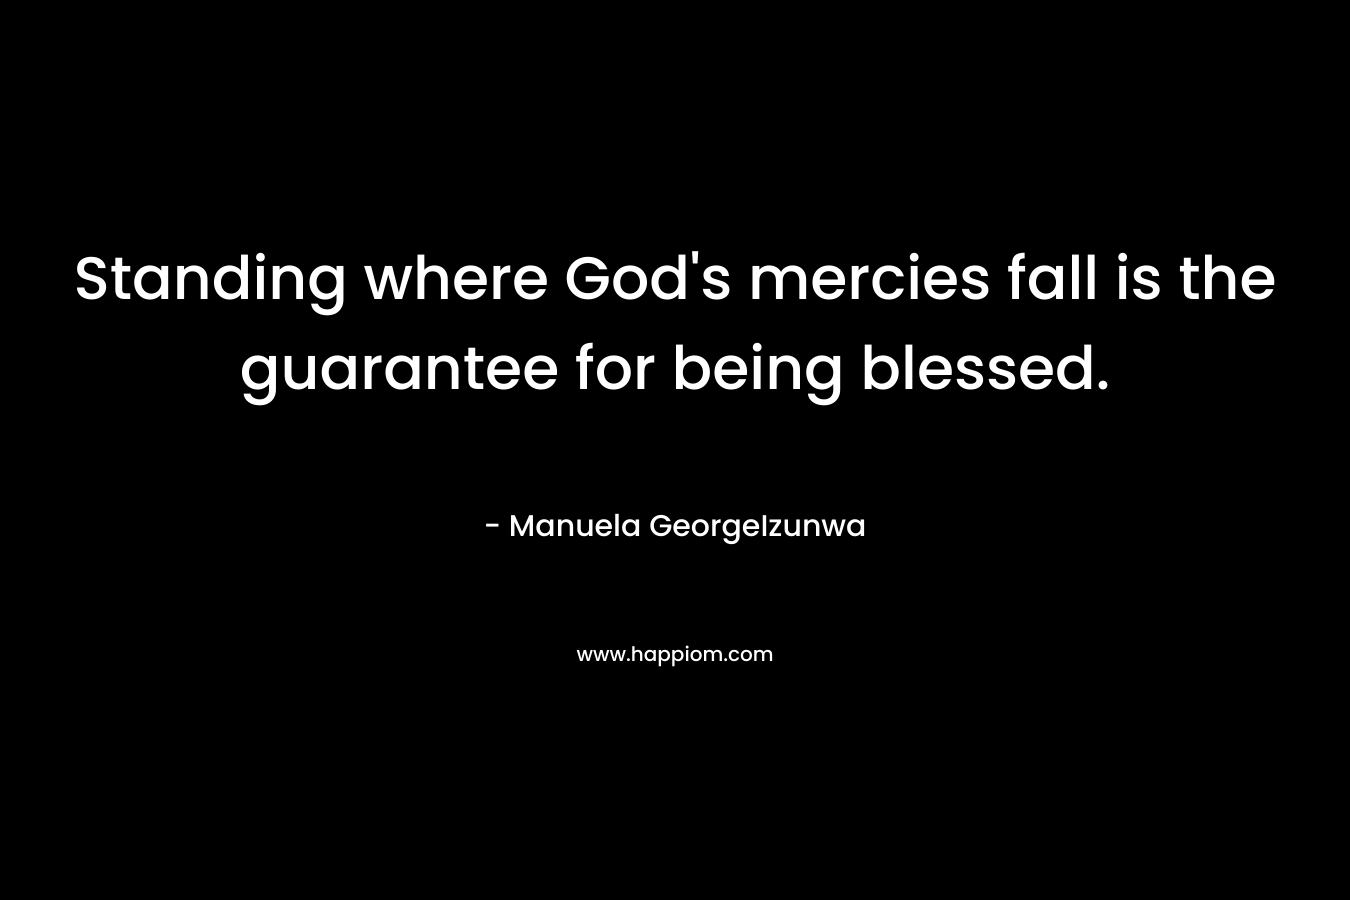 Standing where God’s mercies fall is the guarantee for being blessed. – Manuela GeorgeIzunwa